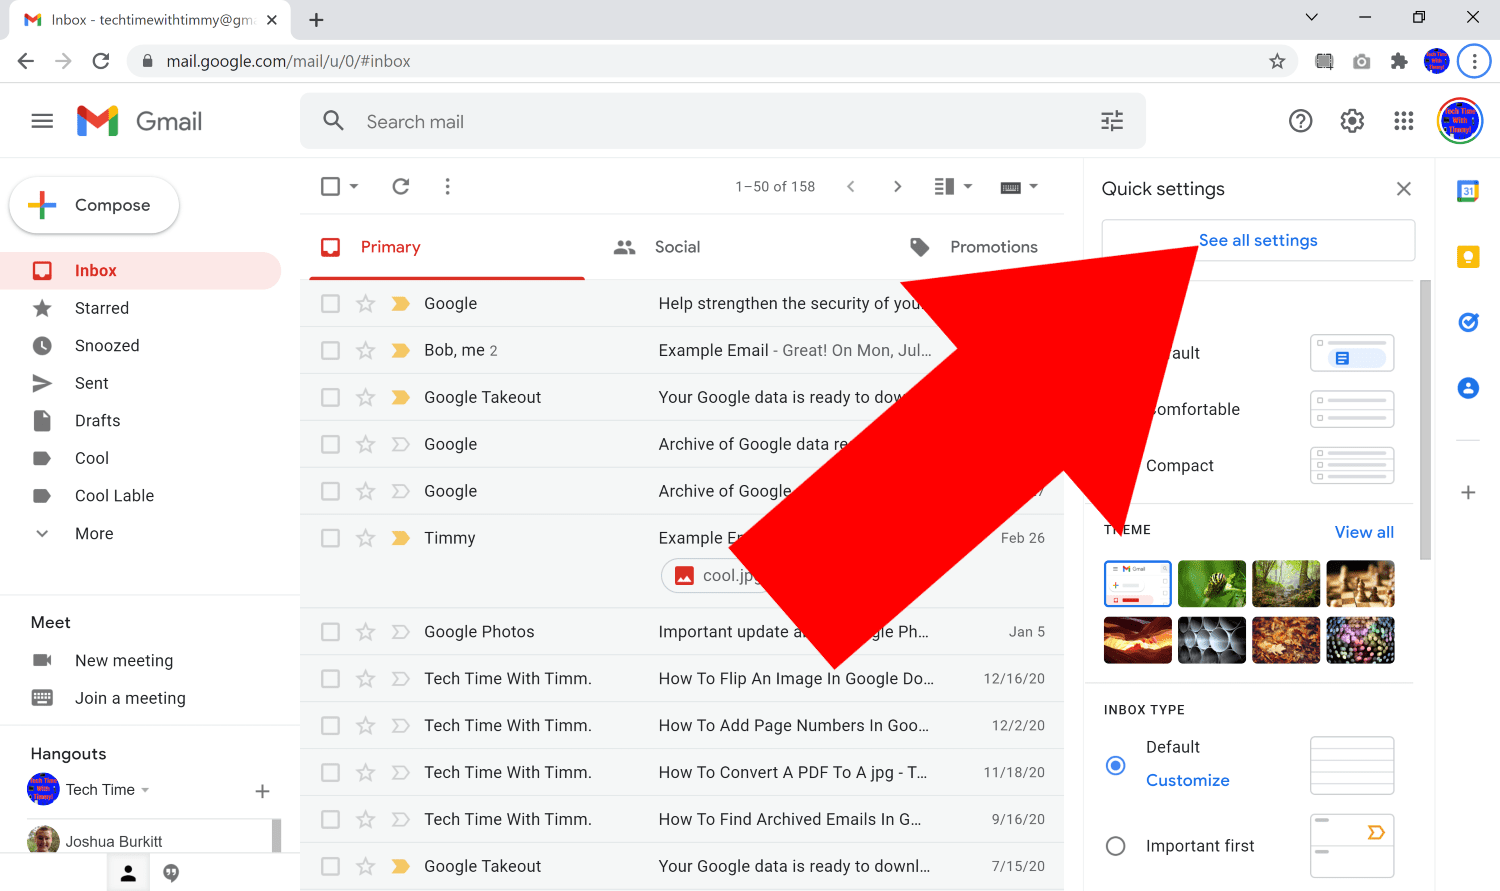 how to remove social and promotions from gmail